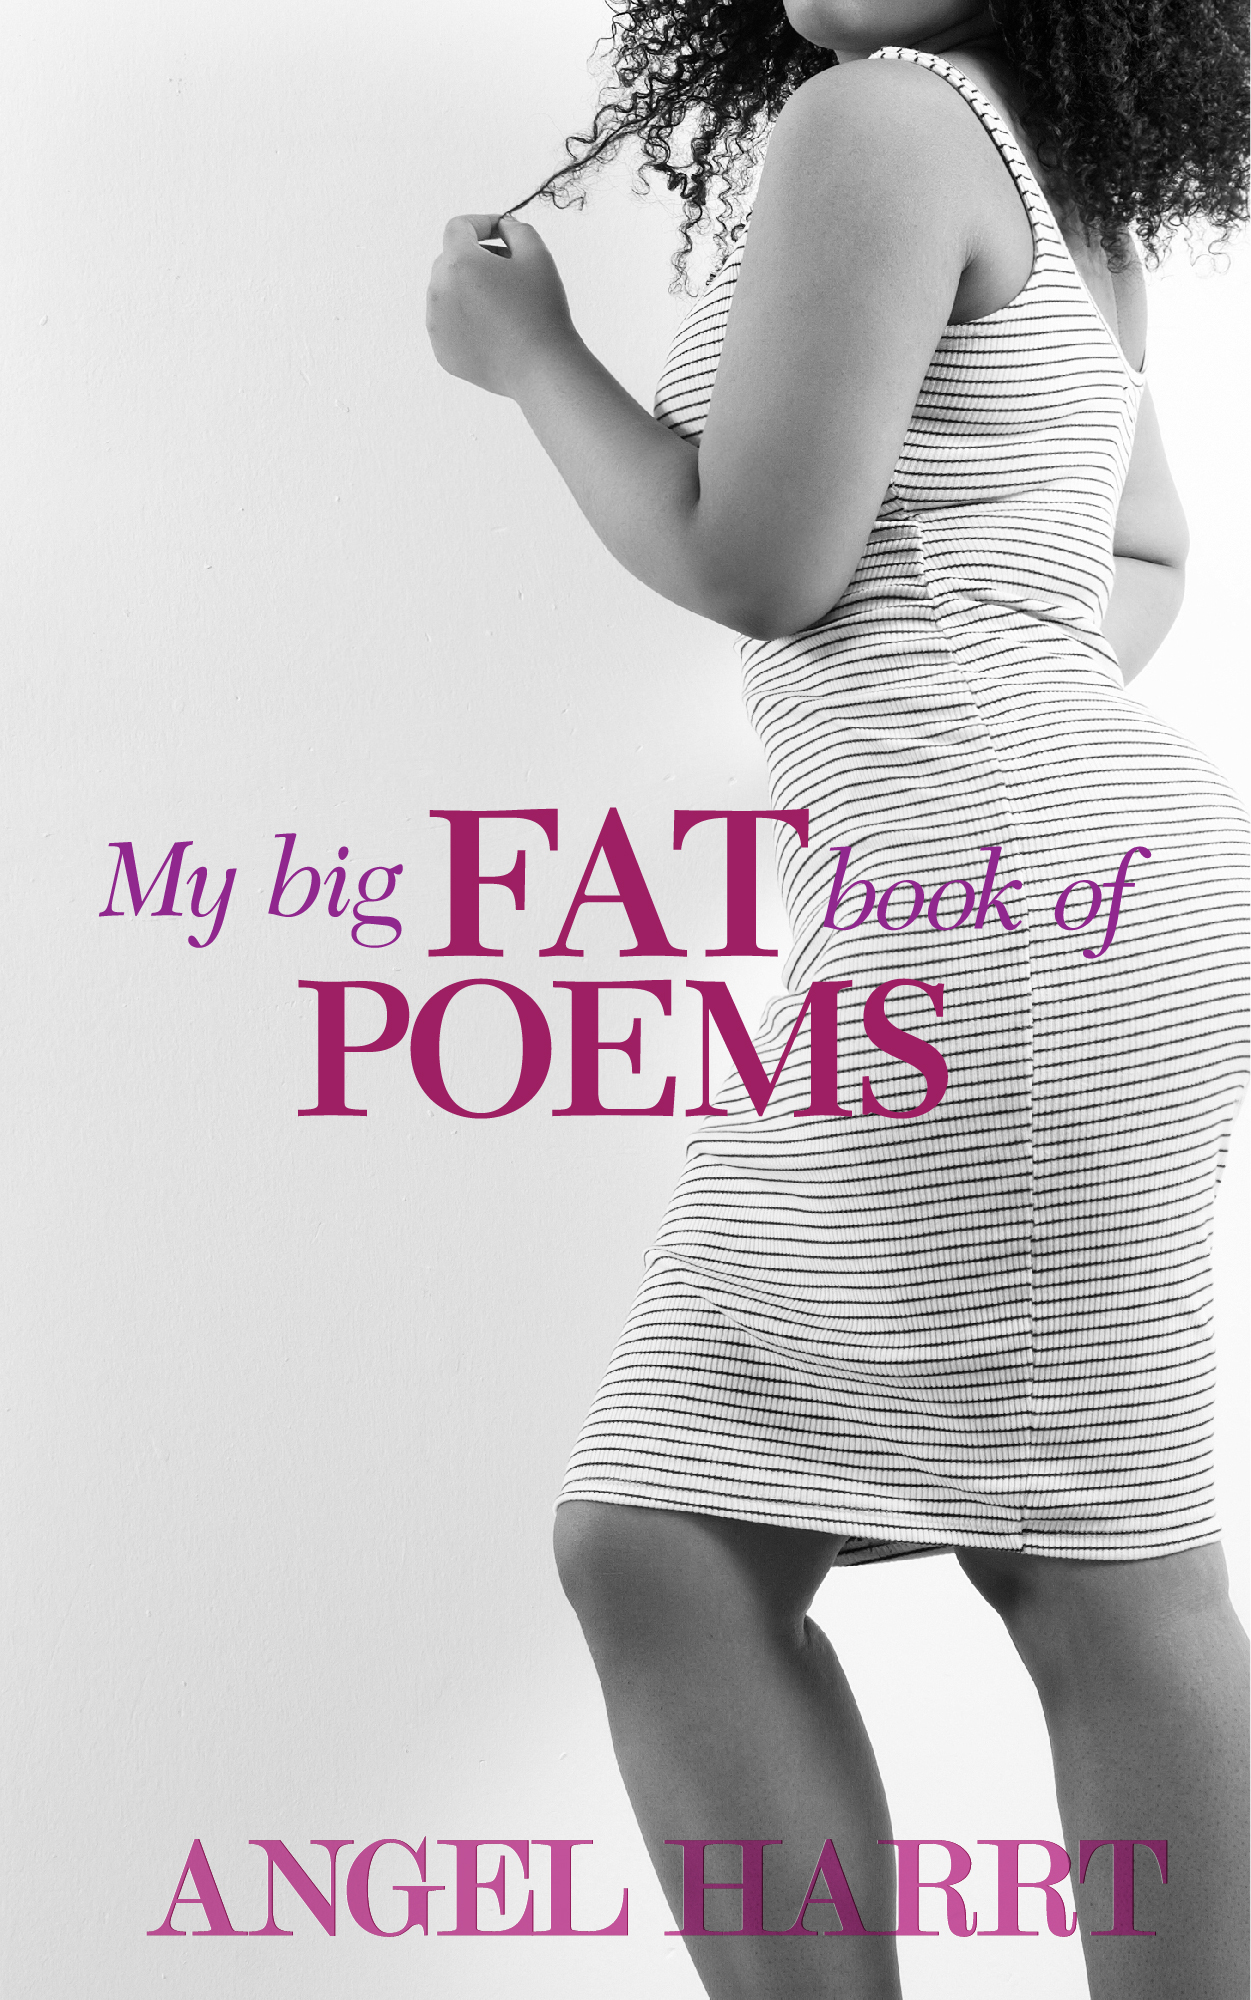 My Big Fat Book of Poems